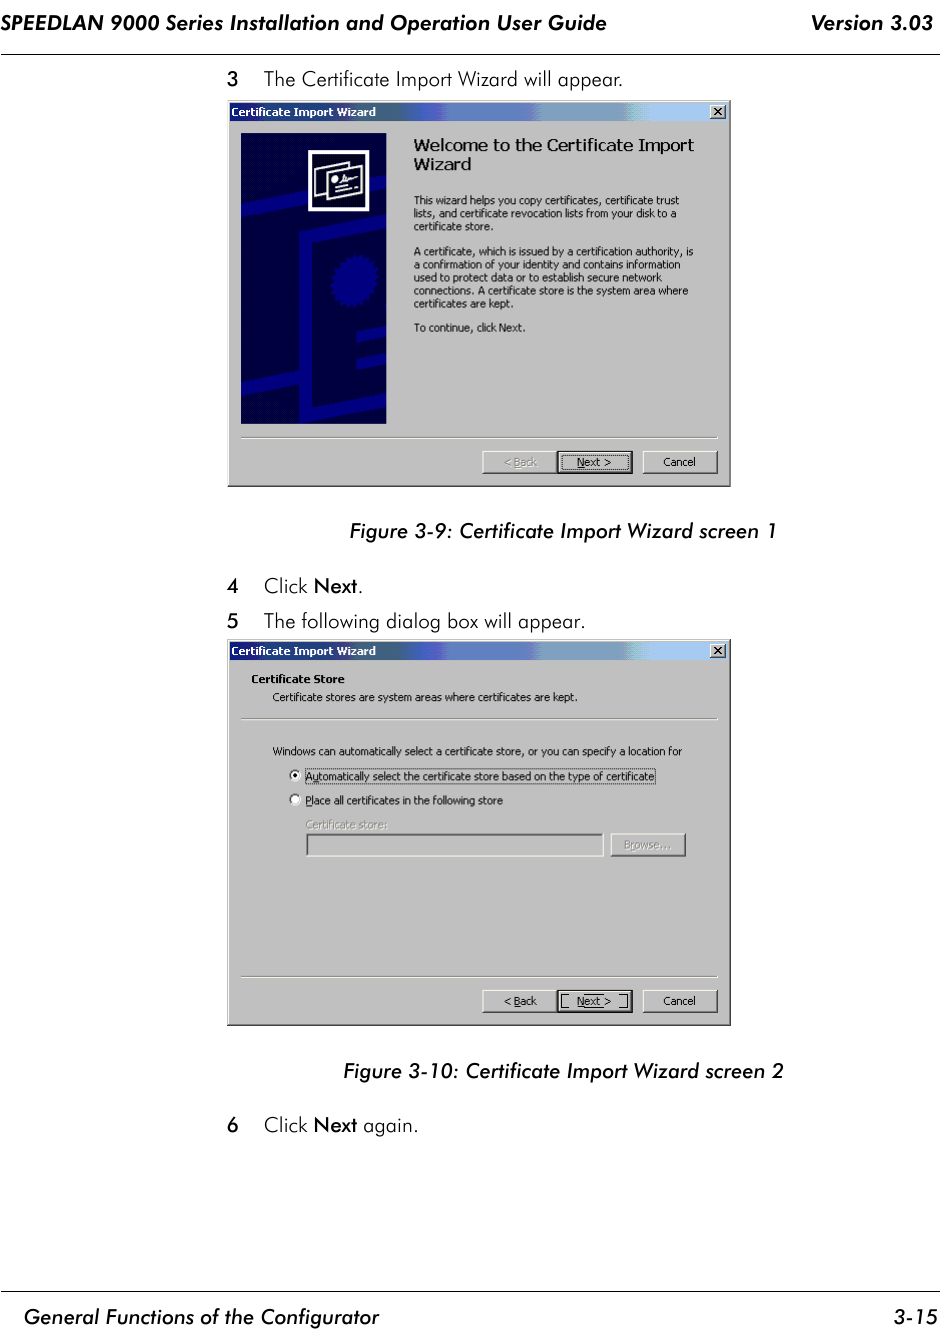 SPEEDLAN 9000 Series Installation and Operation User Guide                                 Version 3.03     General Functions of the Configurator 3-15                                                                                                                                                              3The Certificate Import Wizard will appear.  Figure 3-9: Certificate Import Wizard screen 14   Click Next.5The following dialog box will appear.Figure 3-10: Certificate Import Wizard screen 26Click Next again.